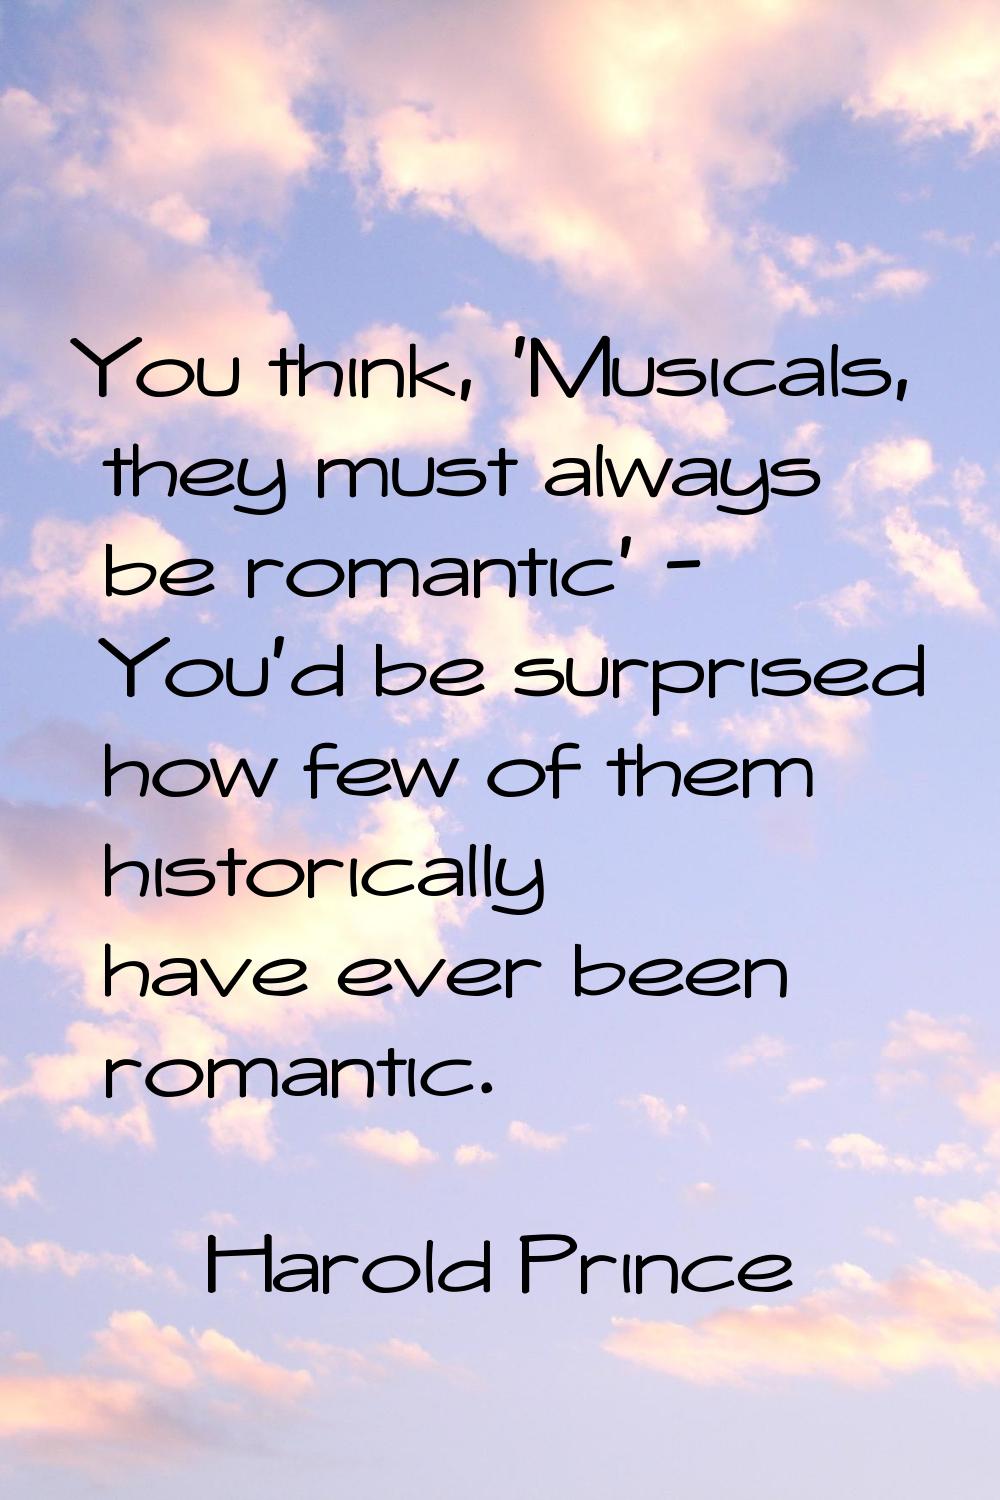 You think, 'Musicals, they must always be romantic' - You'd be surprised how few of them historical